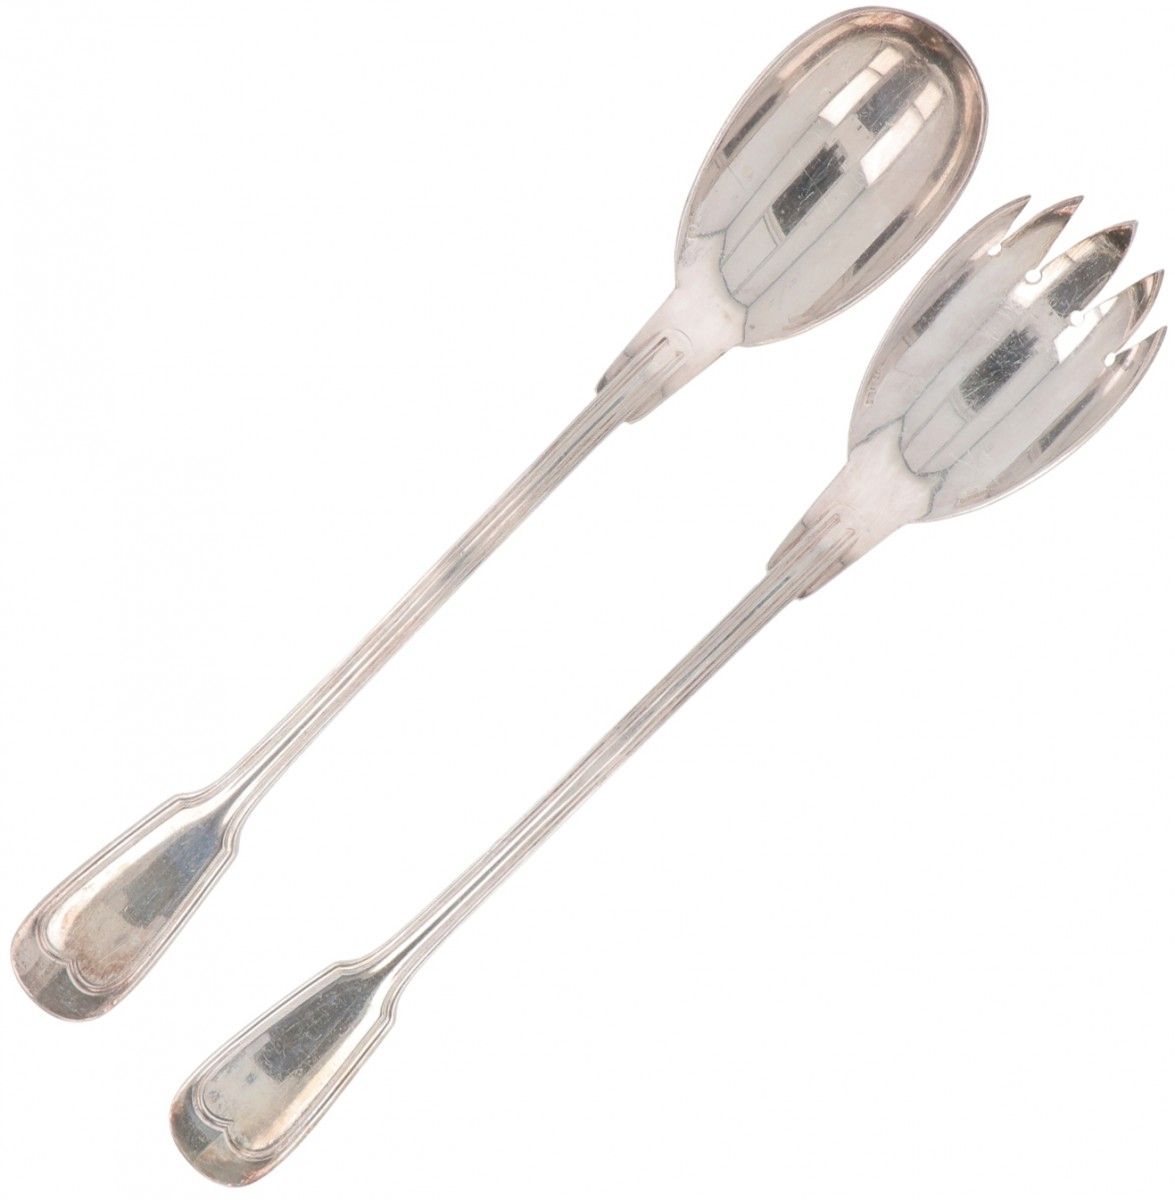 (2) piece salad servers, Christofle "Chinon", silver-plated. Modelo "Chinon". Fr&hellip;